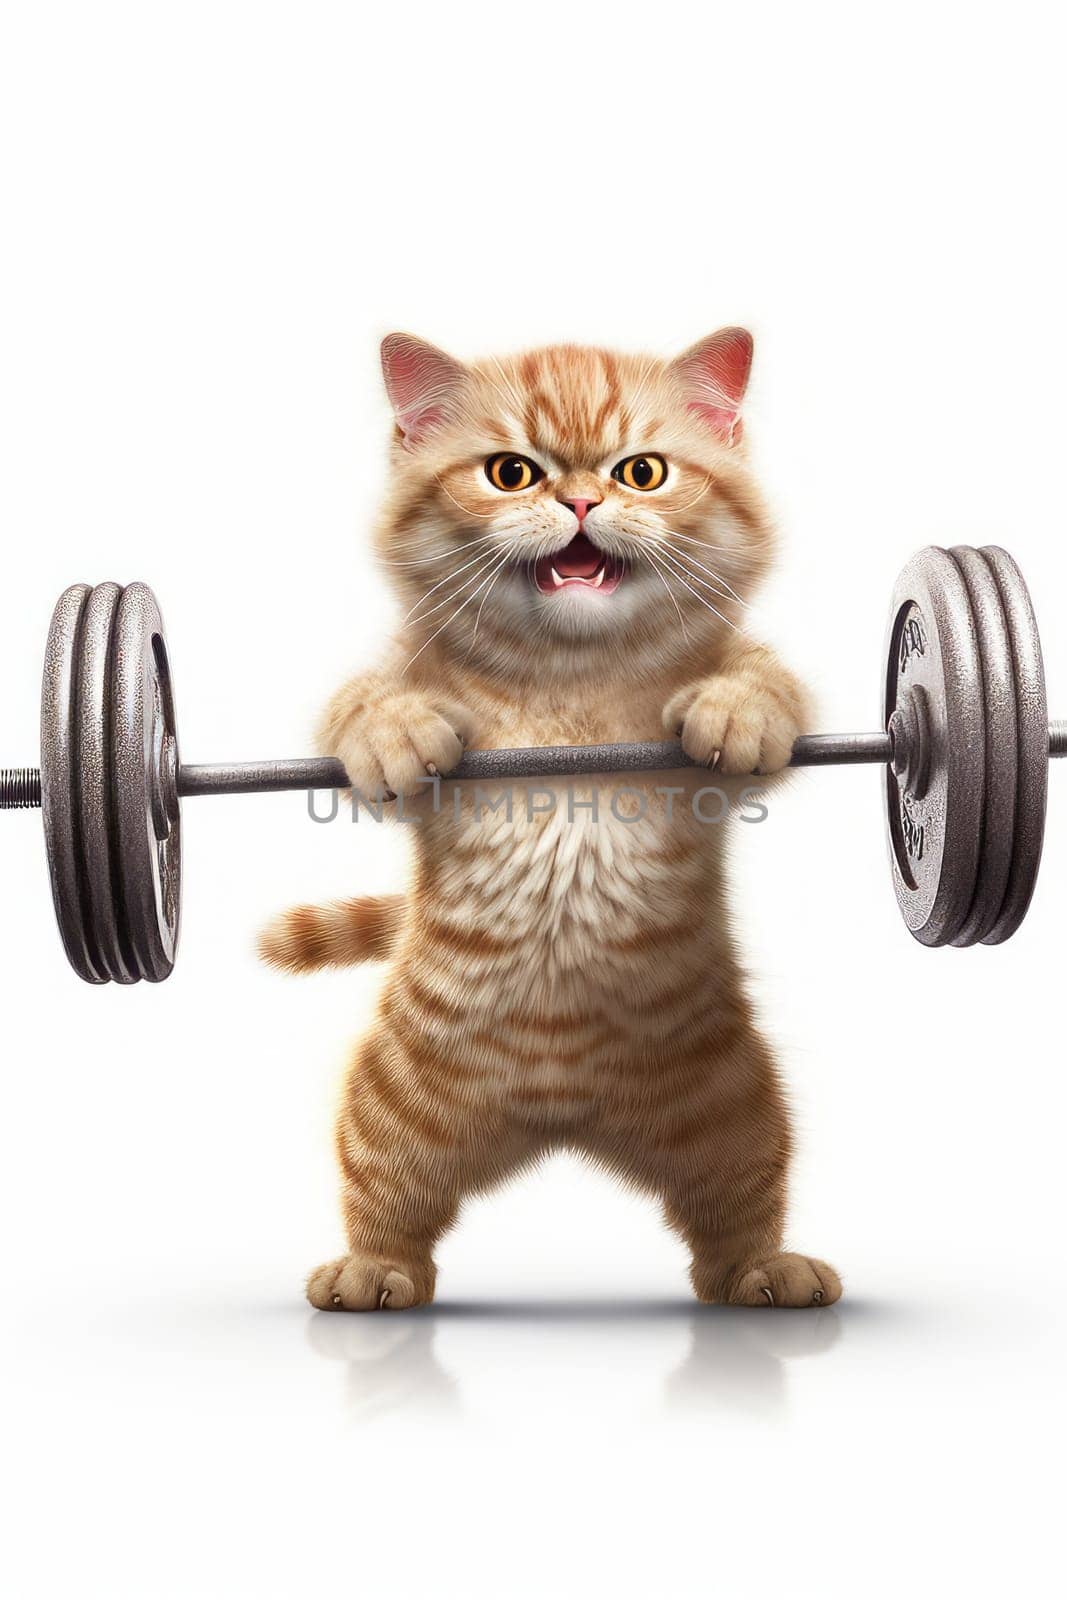 A red-haired kitten lifts a barbell standing on a white background by Zakharova